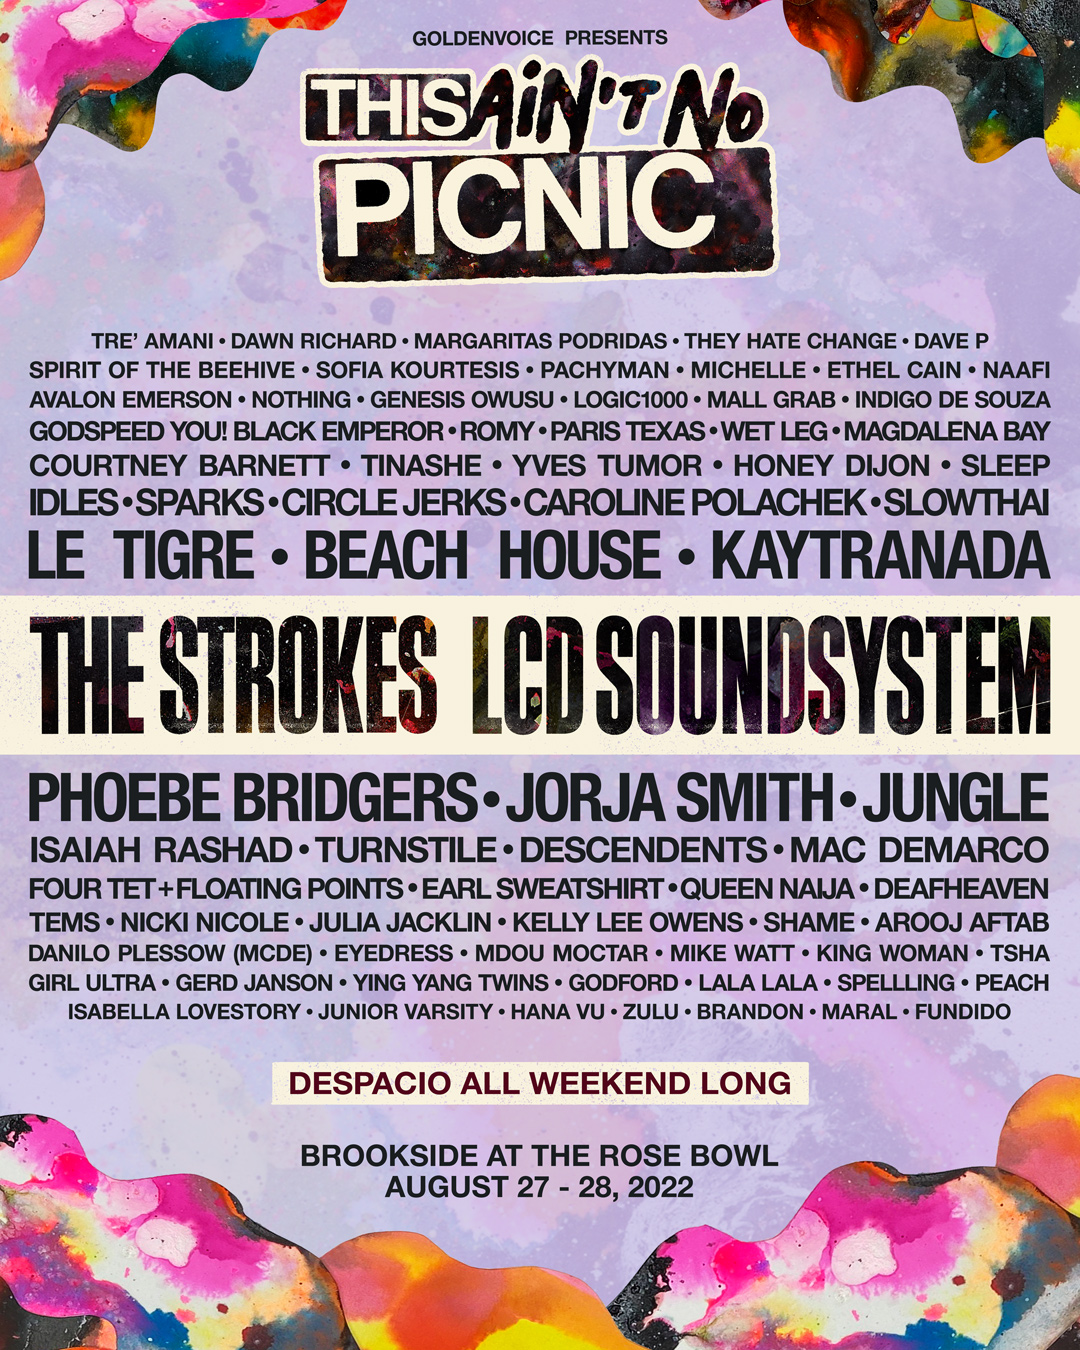 This Aint No Picnic poster